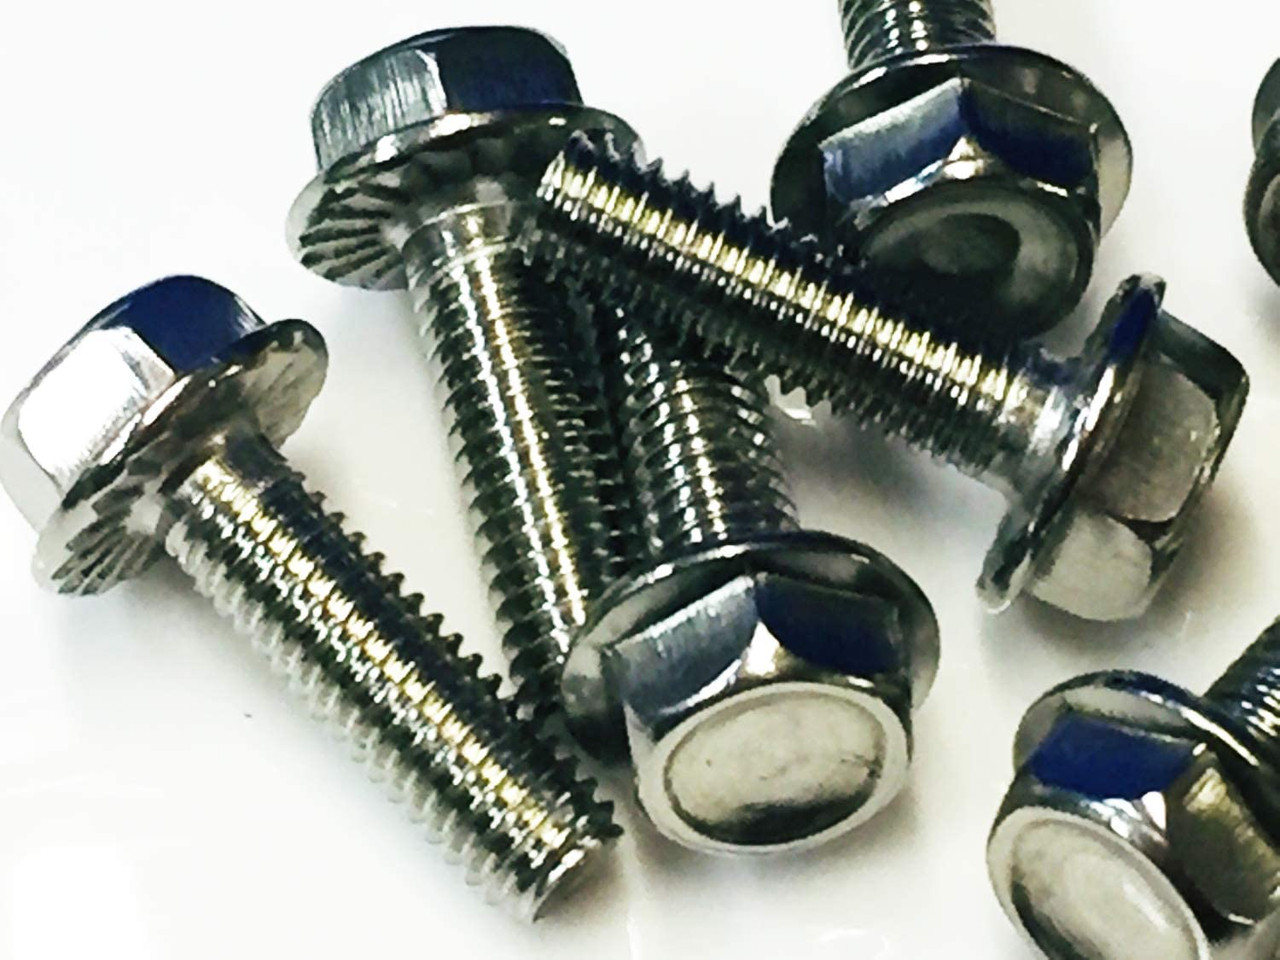 M6 x 20mm 6mm Flanged Hex Head Bolts Pack of 8 A2 Grade Stainless Steel Flange Hexagon Head Bolt Screw